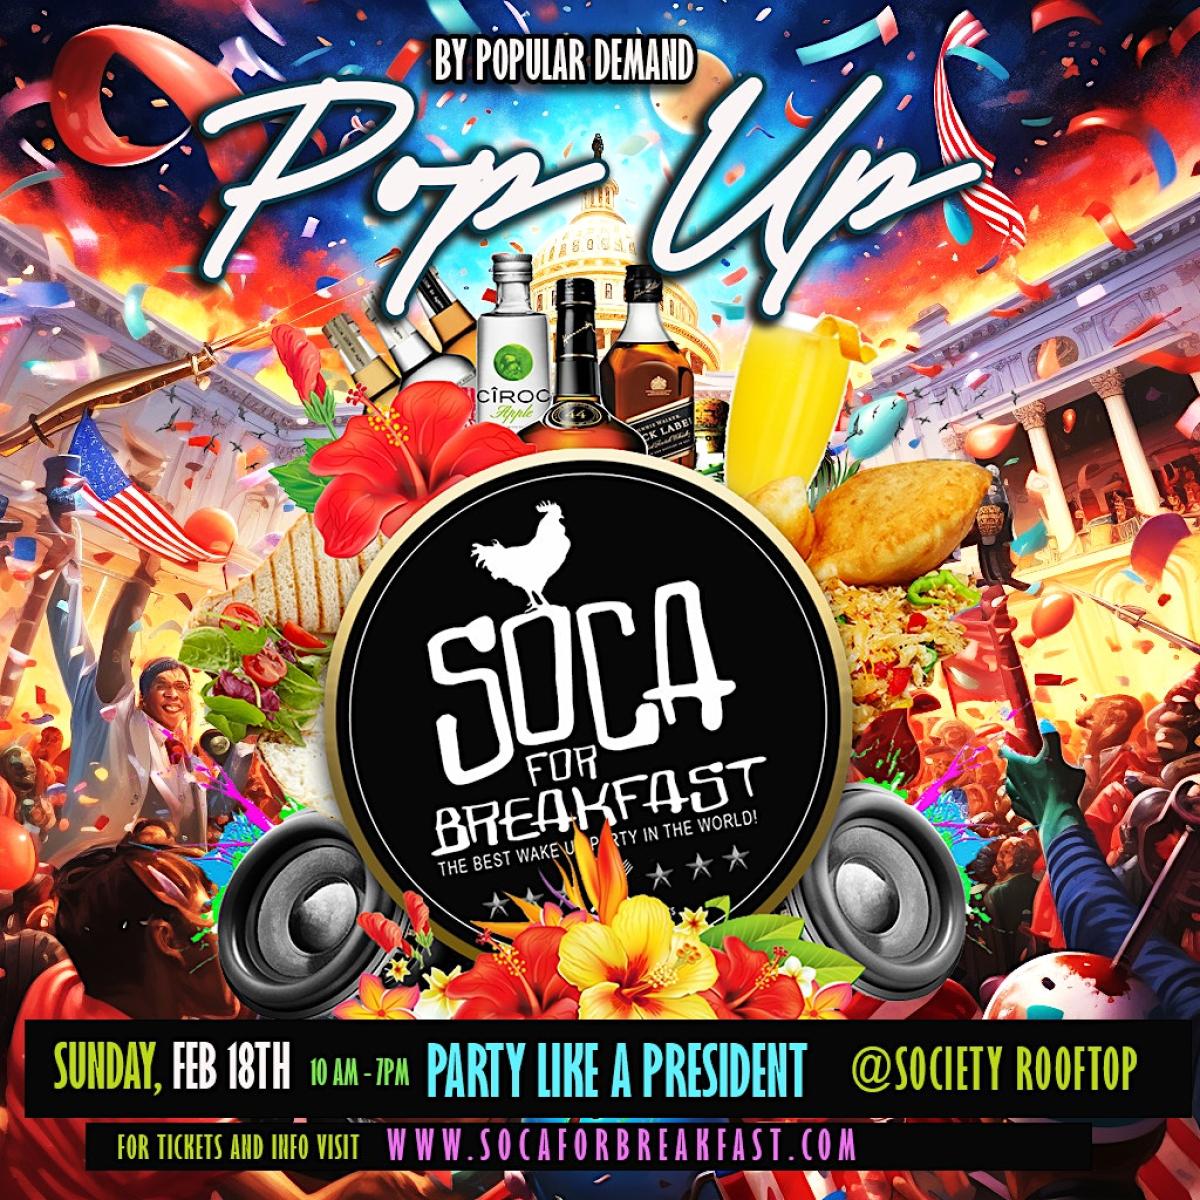 SOCA FOR BREAKFAST - PARTY LIKE A PRESIDENT flyer or graphic.